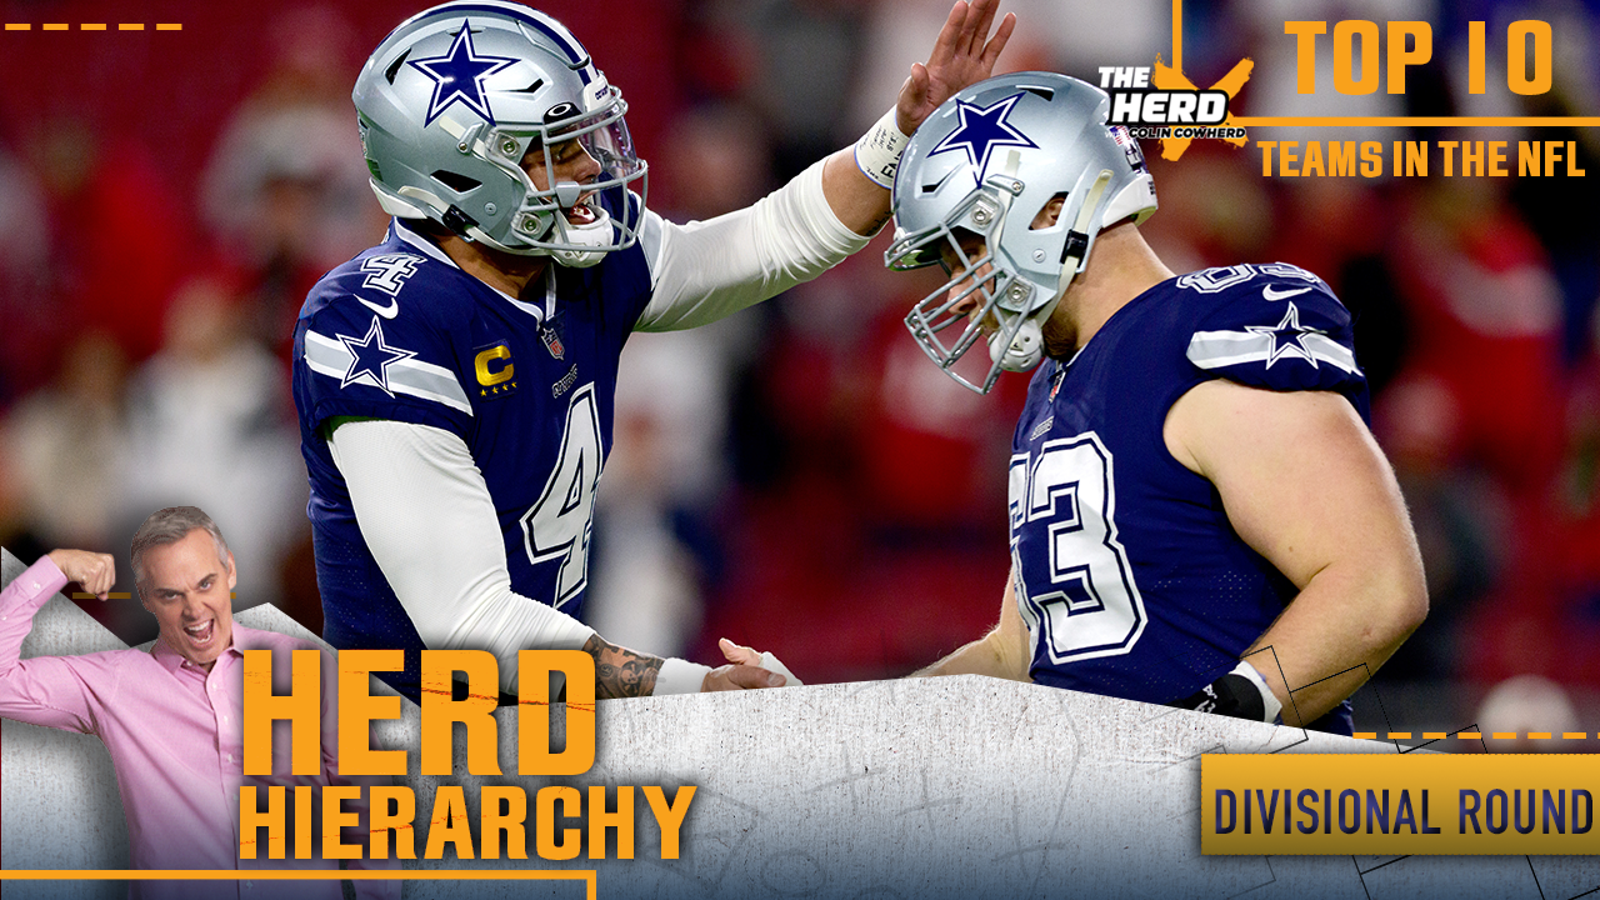 Herd hierarchy: The Cowboys and Eagles lead the way in Cullen's first-round divisional teams